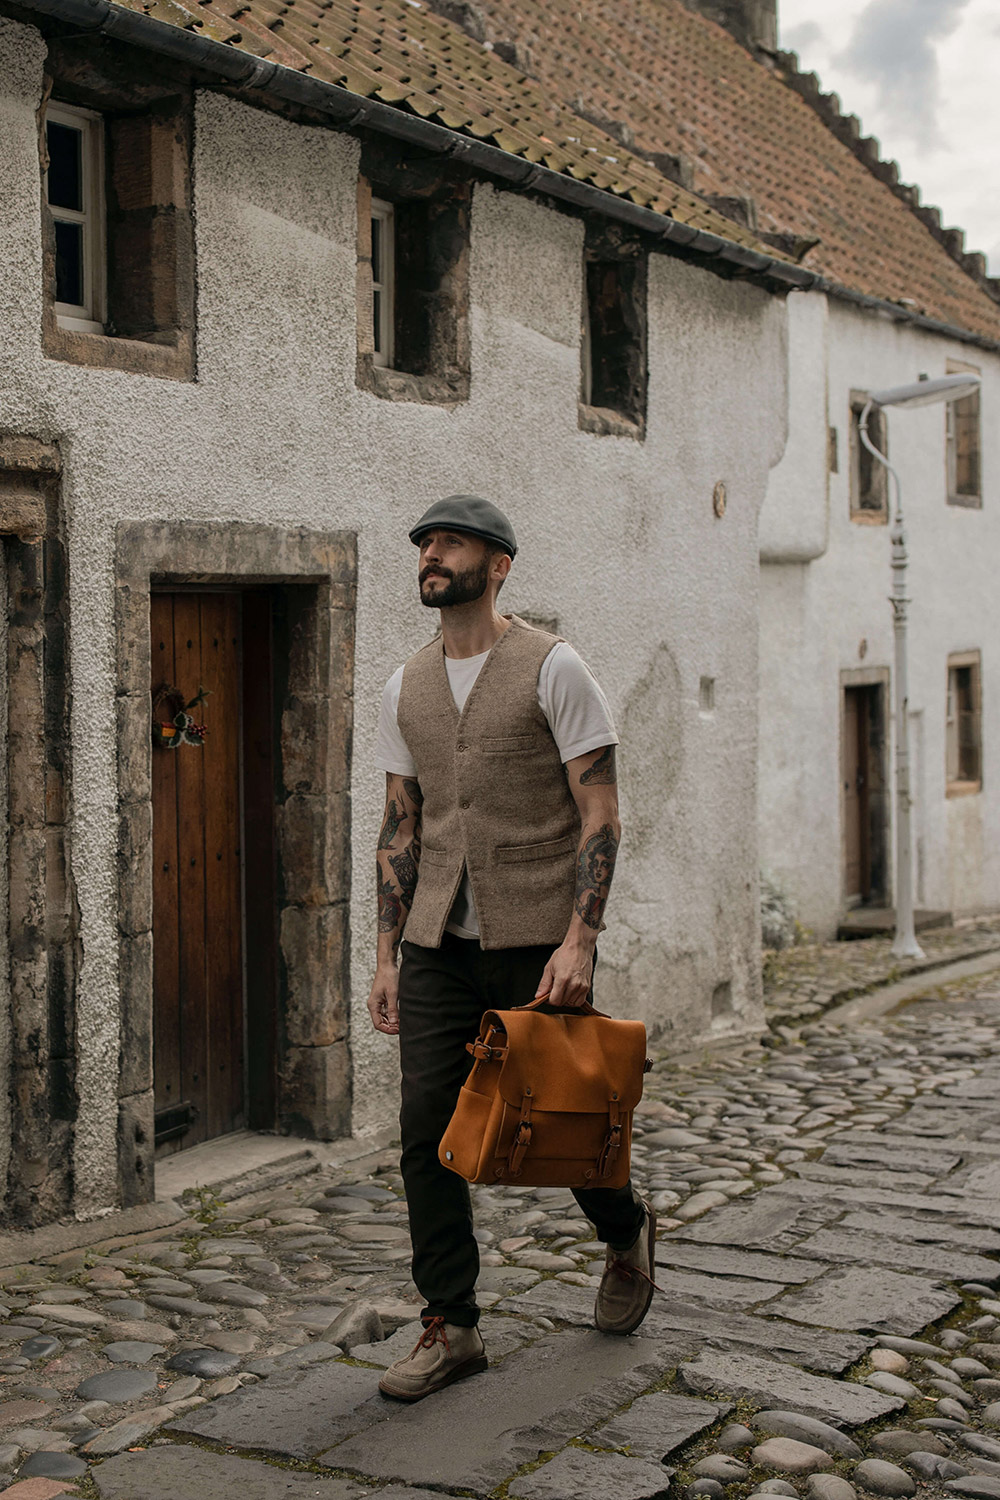 A man carrying a leather satchel in a village